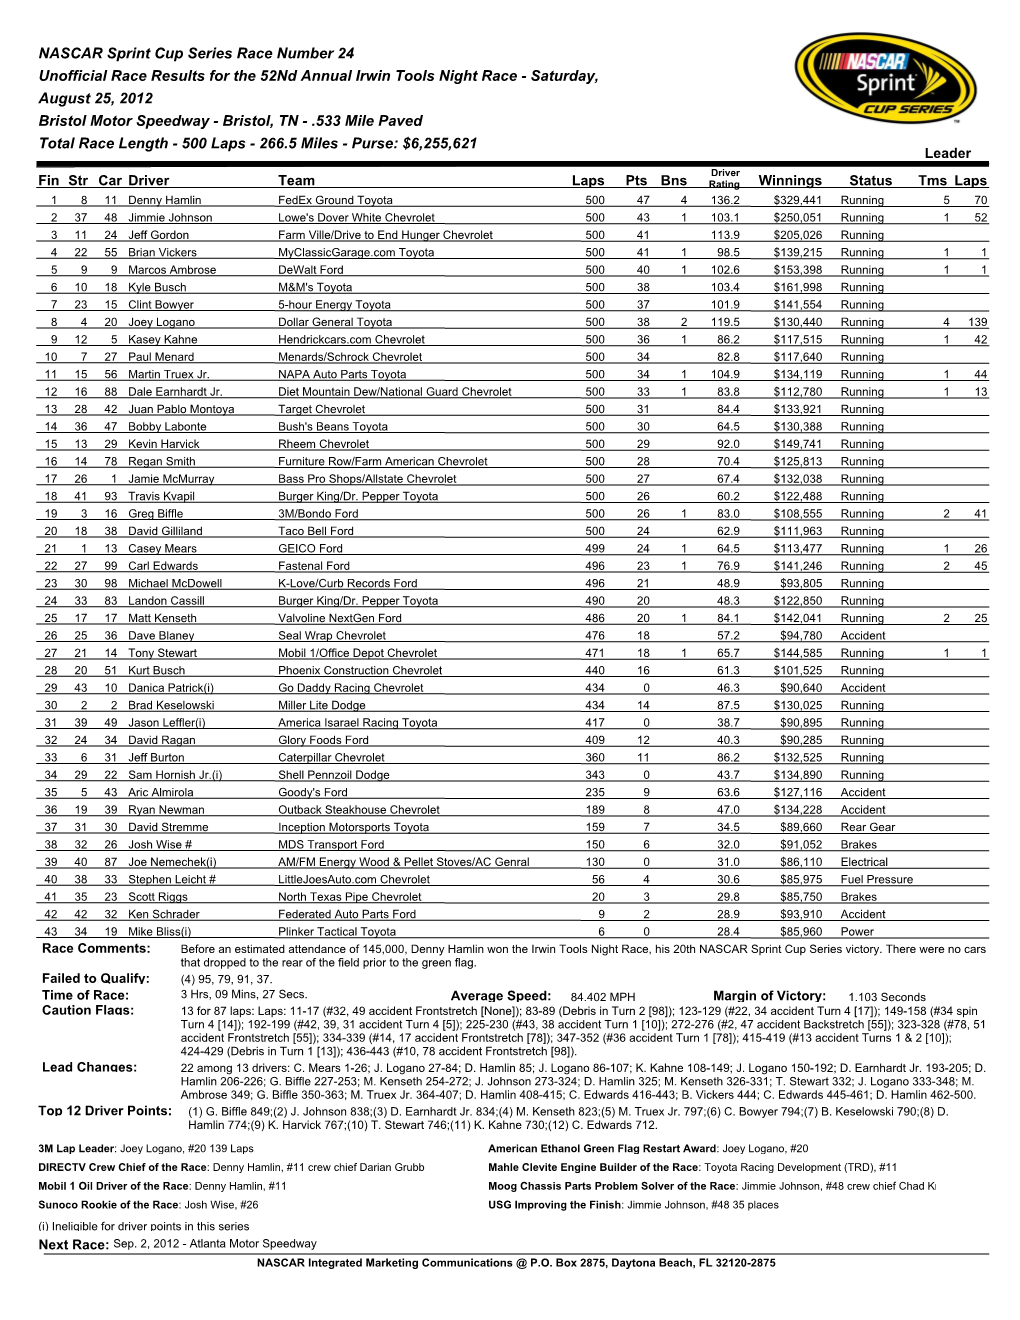 NASCAR Sprint Cup Series Race Number 24 Unofficial Race Results